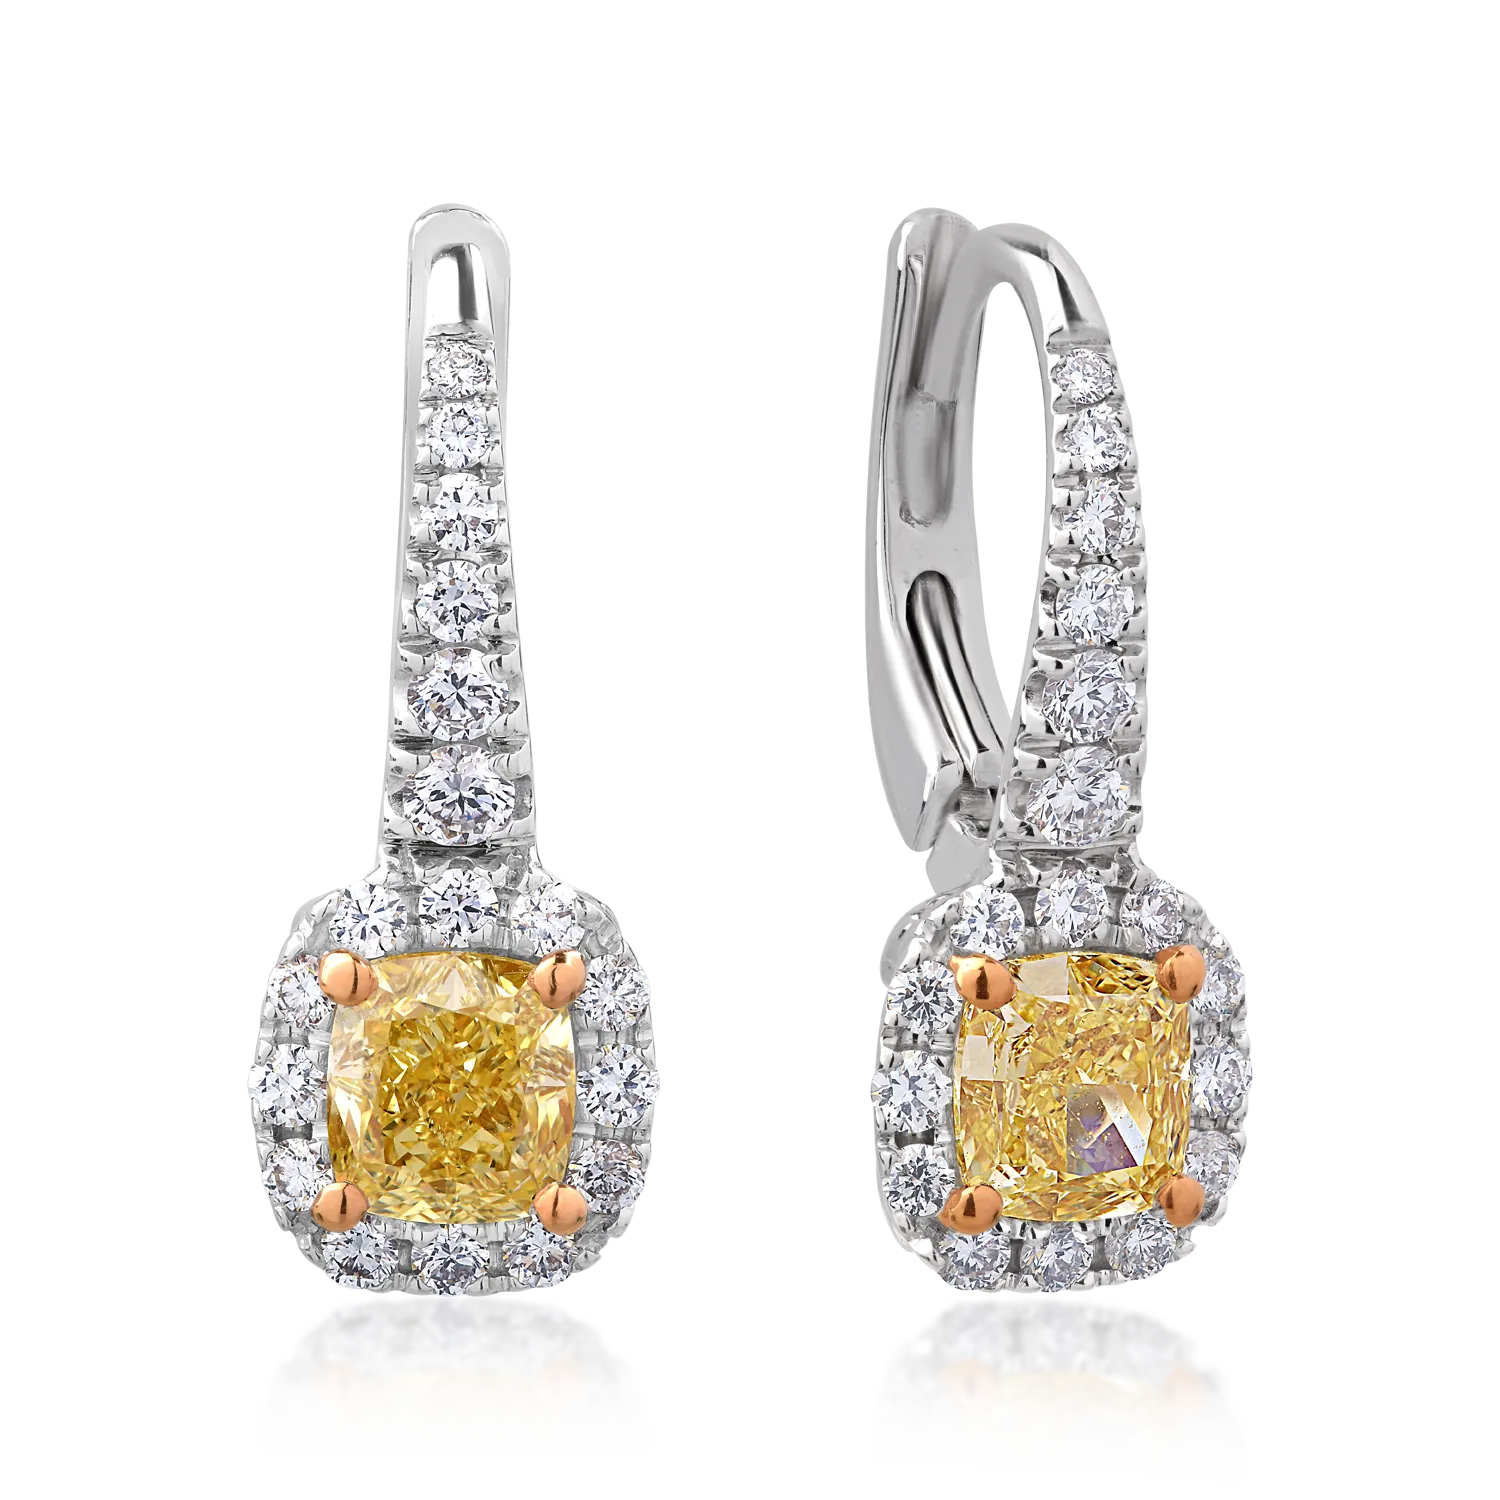 18K white gold earrings with 1.19ct fancy-yellow diamonds and 0.52ct clear diamonds